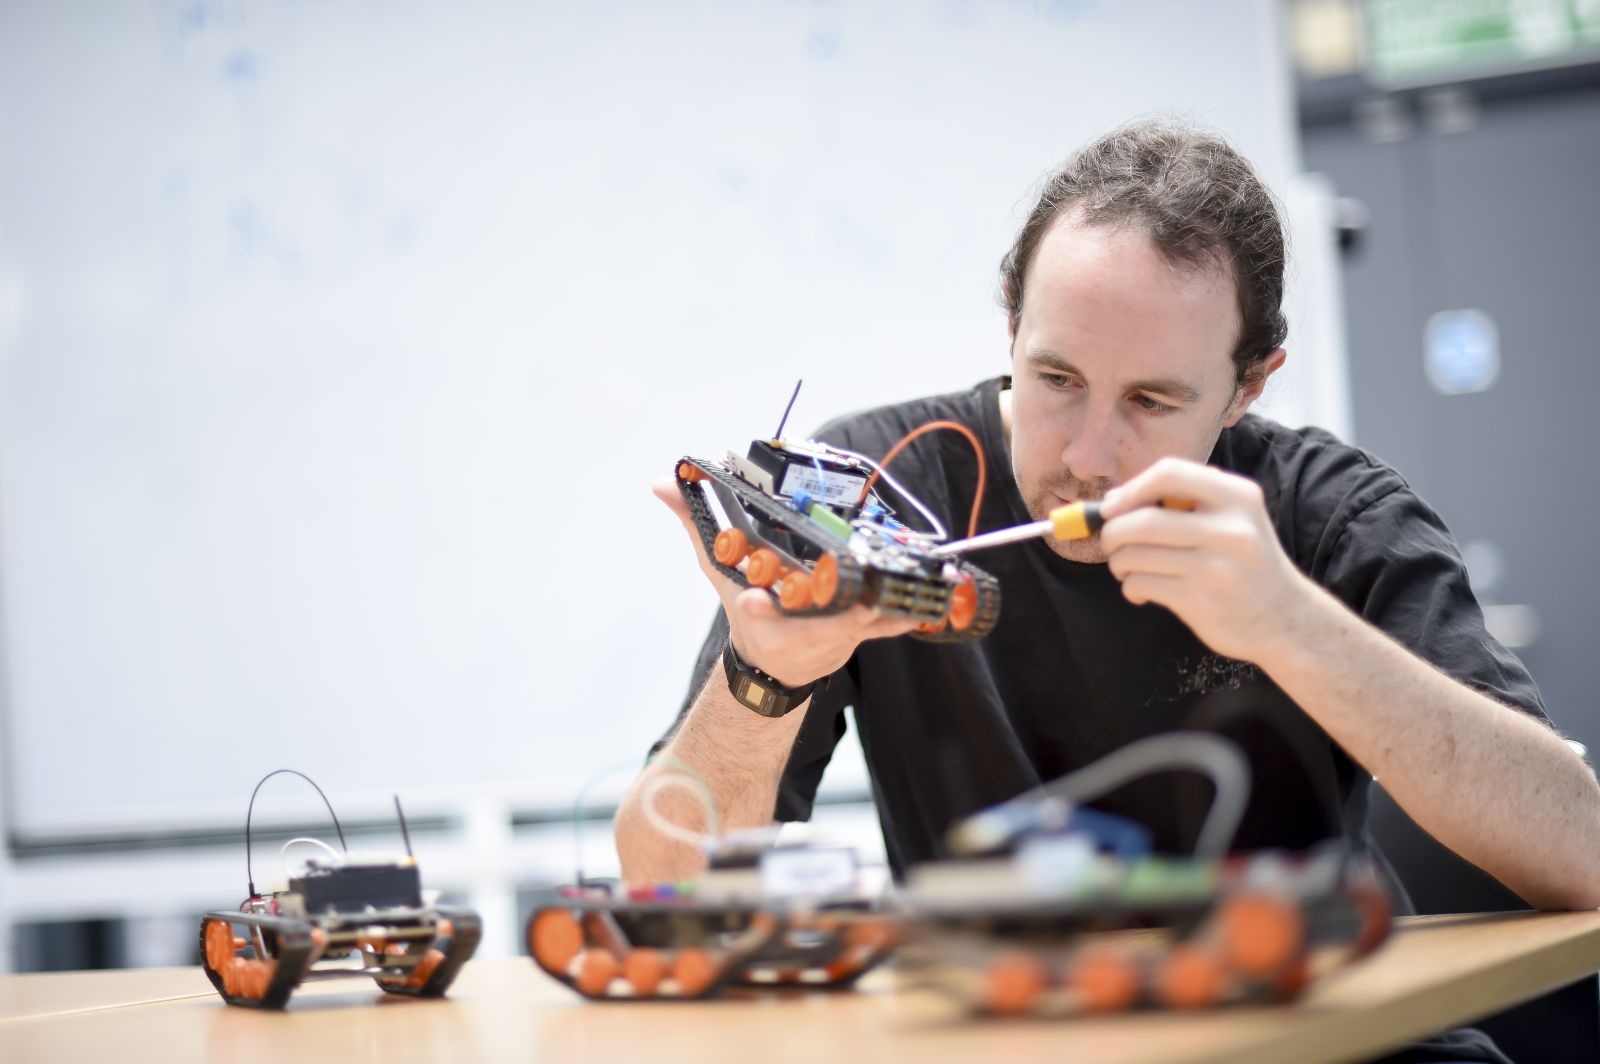 A PhD student works on mini-robots for his robotics project at the СƵ